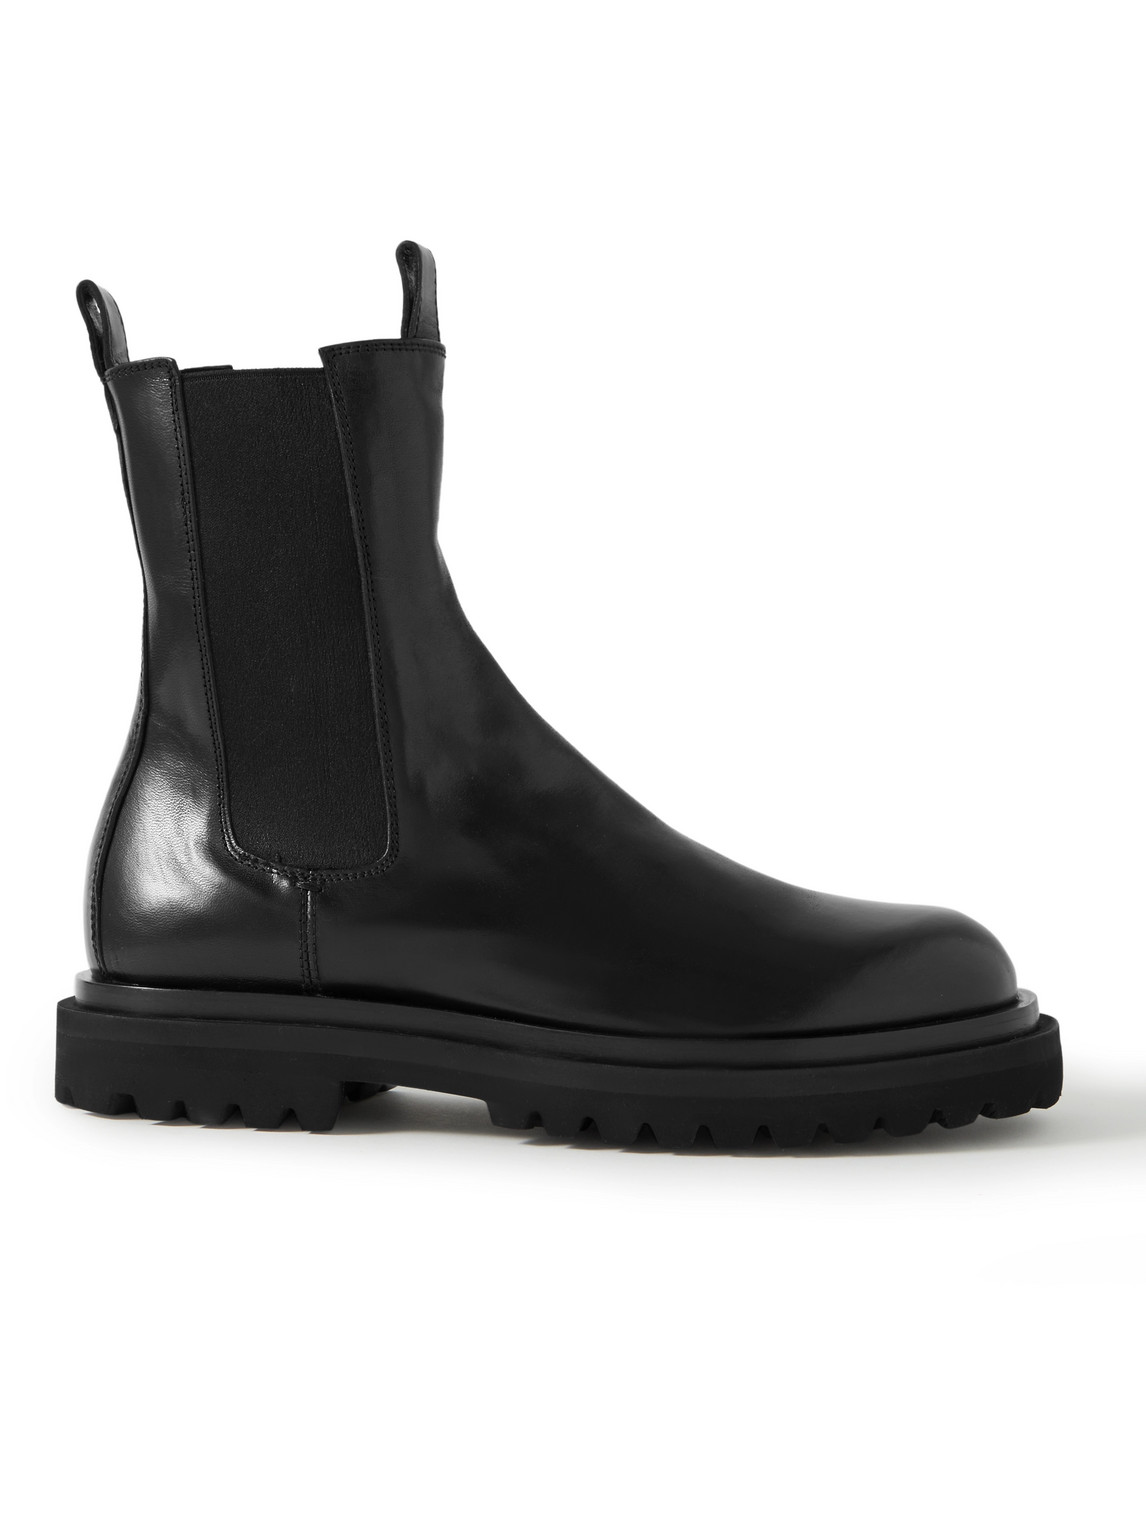 Officine Creative Fiore Lux Leather Chelsea Boots